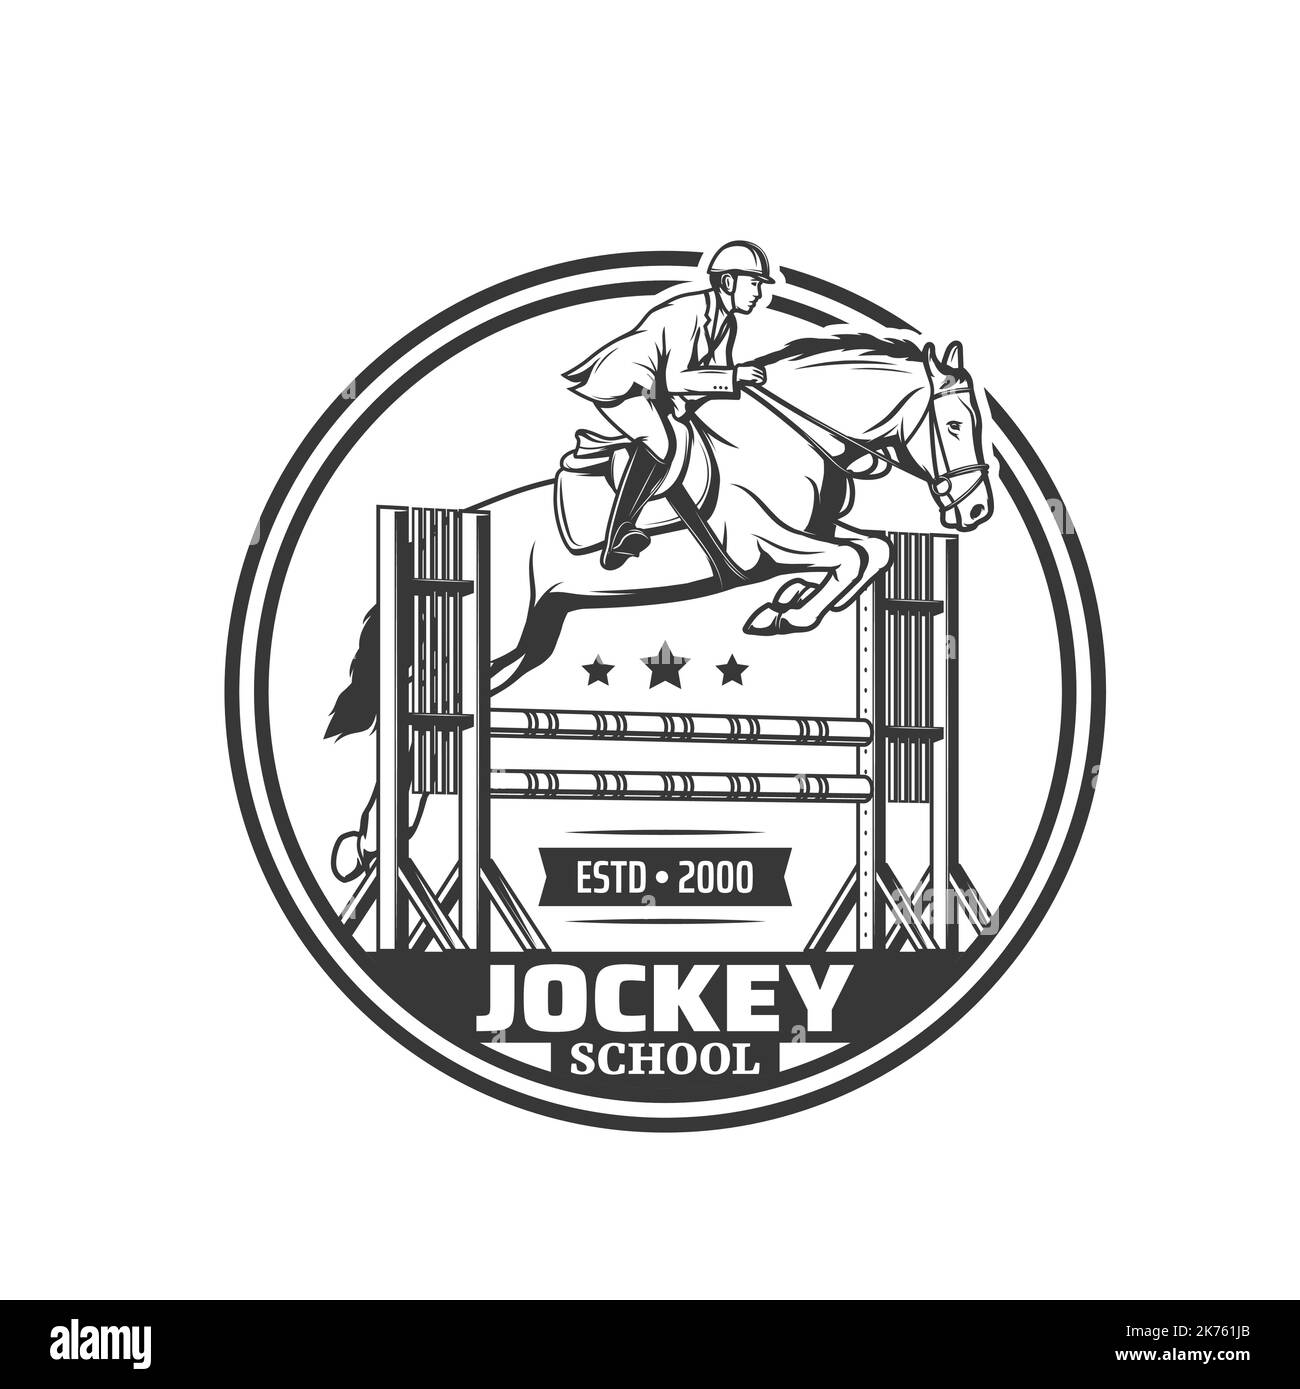 Jockey school vector icon of equestrian sport horse and rider jumping over barrier, jockey boots and helmet, equine harness, saddle. Show jumping, dressage, horse racing or derby isolated symbol Stock Vector